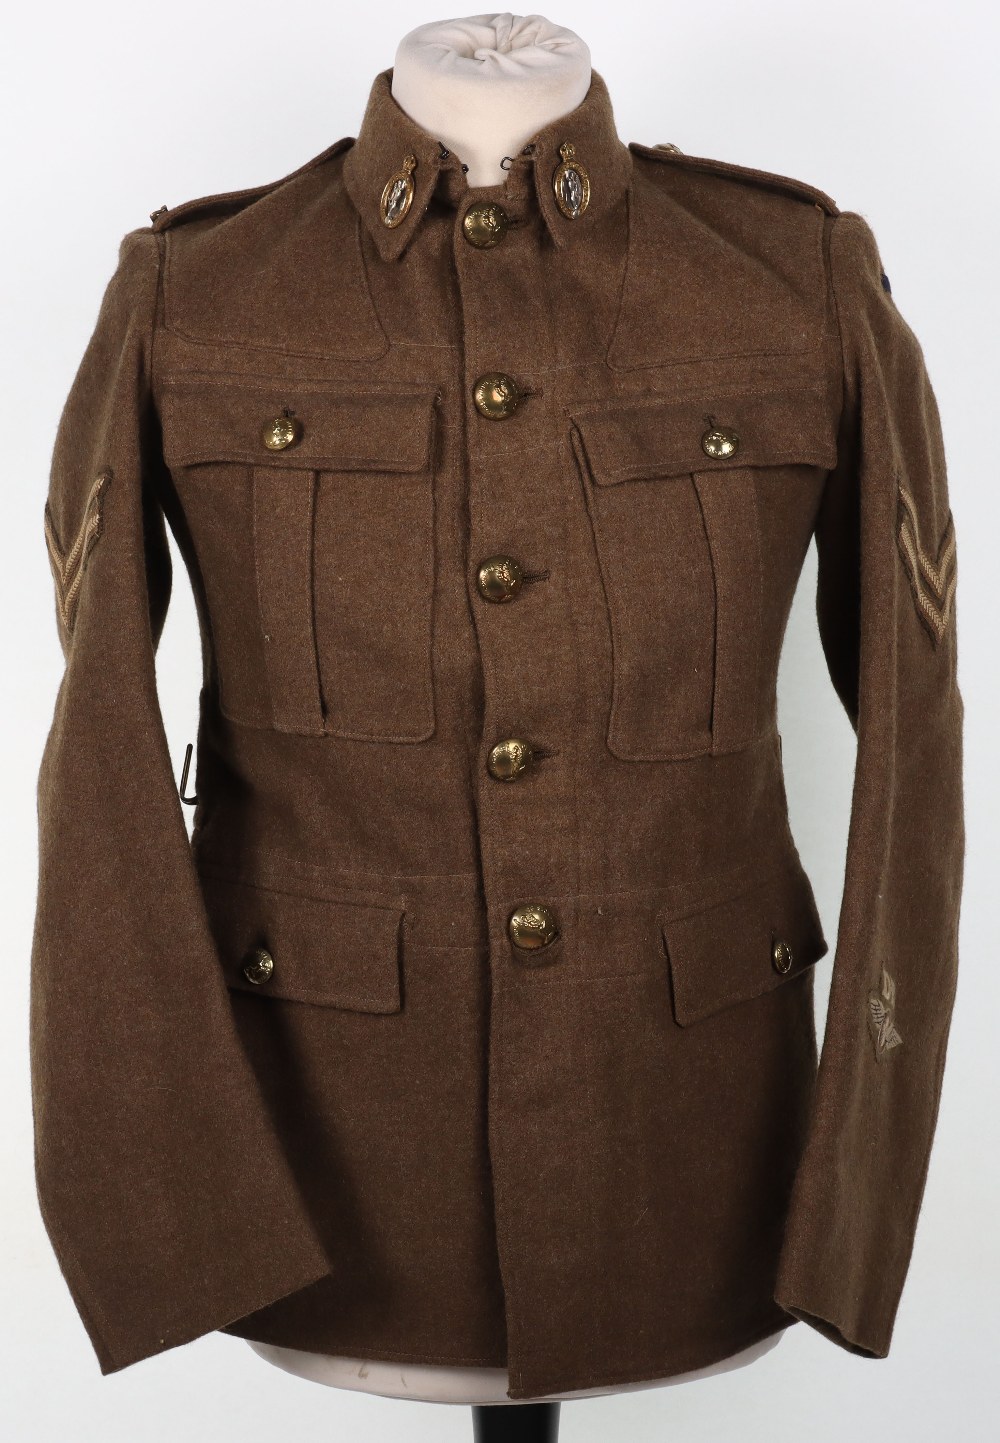 1922 Pattern Royal Signals Dispatch Riders Tunic and Peaked Cap - Image 3 of 19